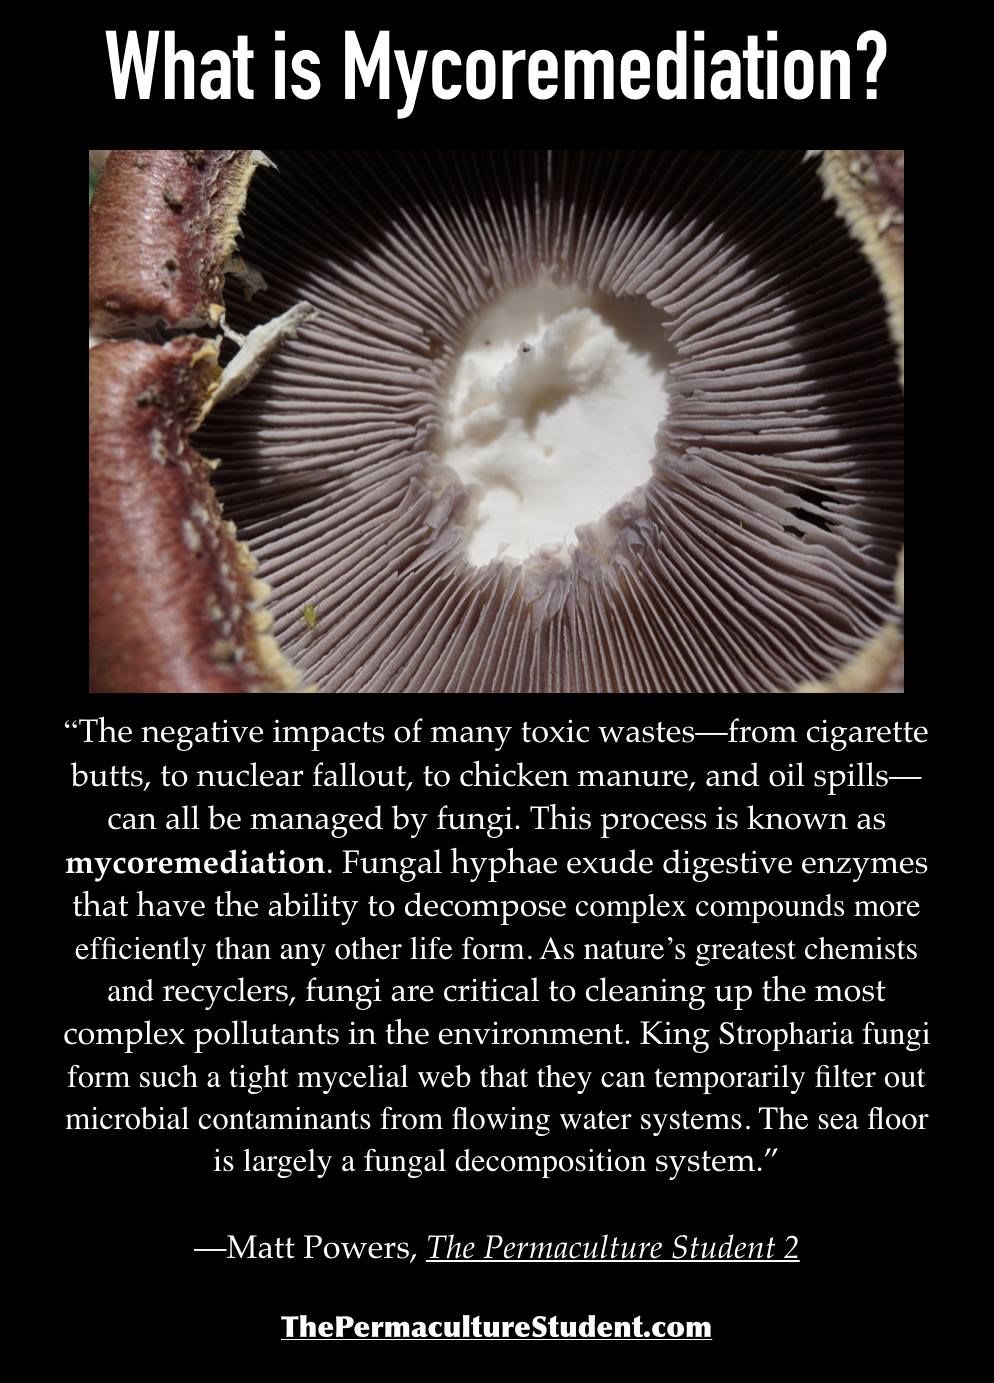 Mycoremediation - Learn more about Fungi with The Permaculture Student 2: http://www.thepermaculturestudent.com/shop/the-p… | Cool science facts, Fungi, Fun science